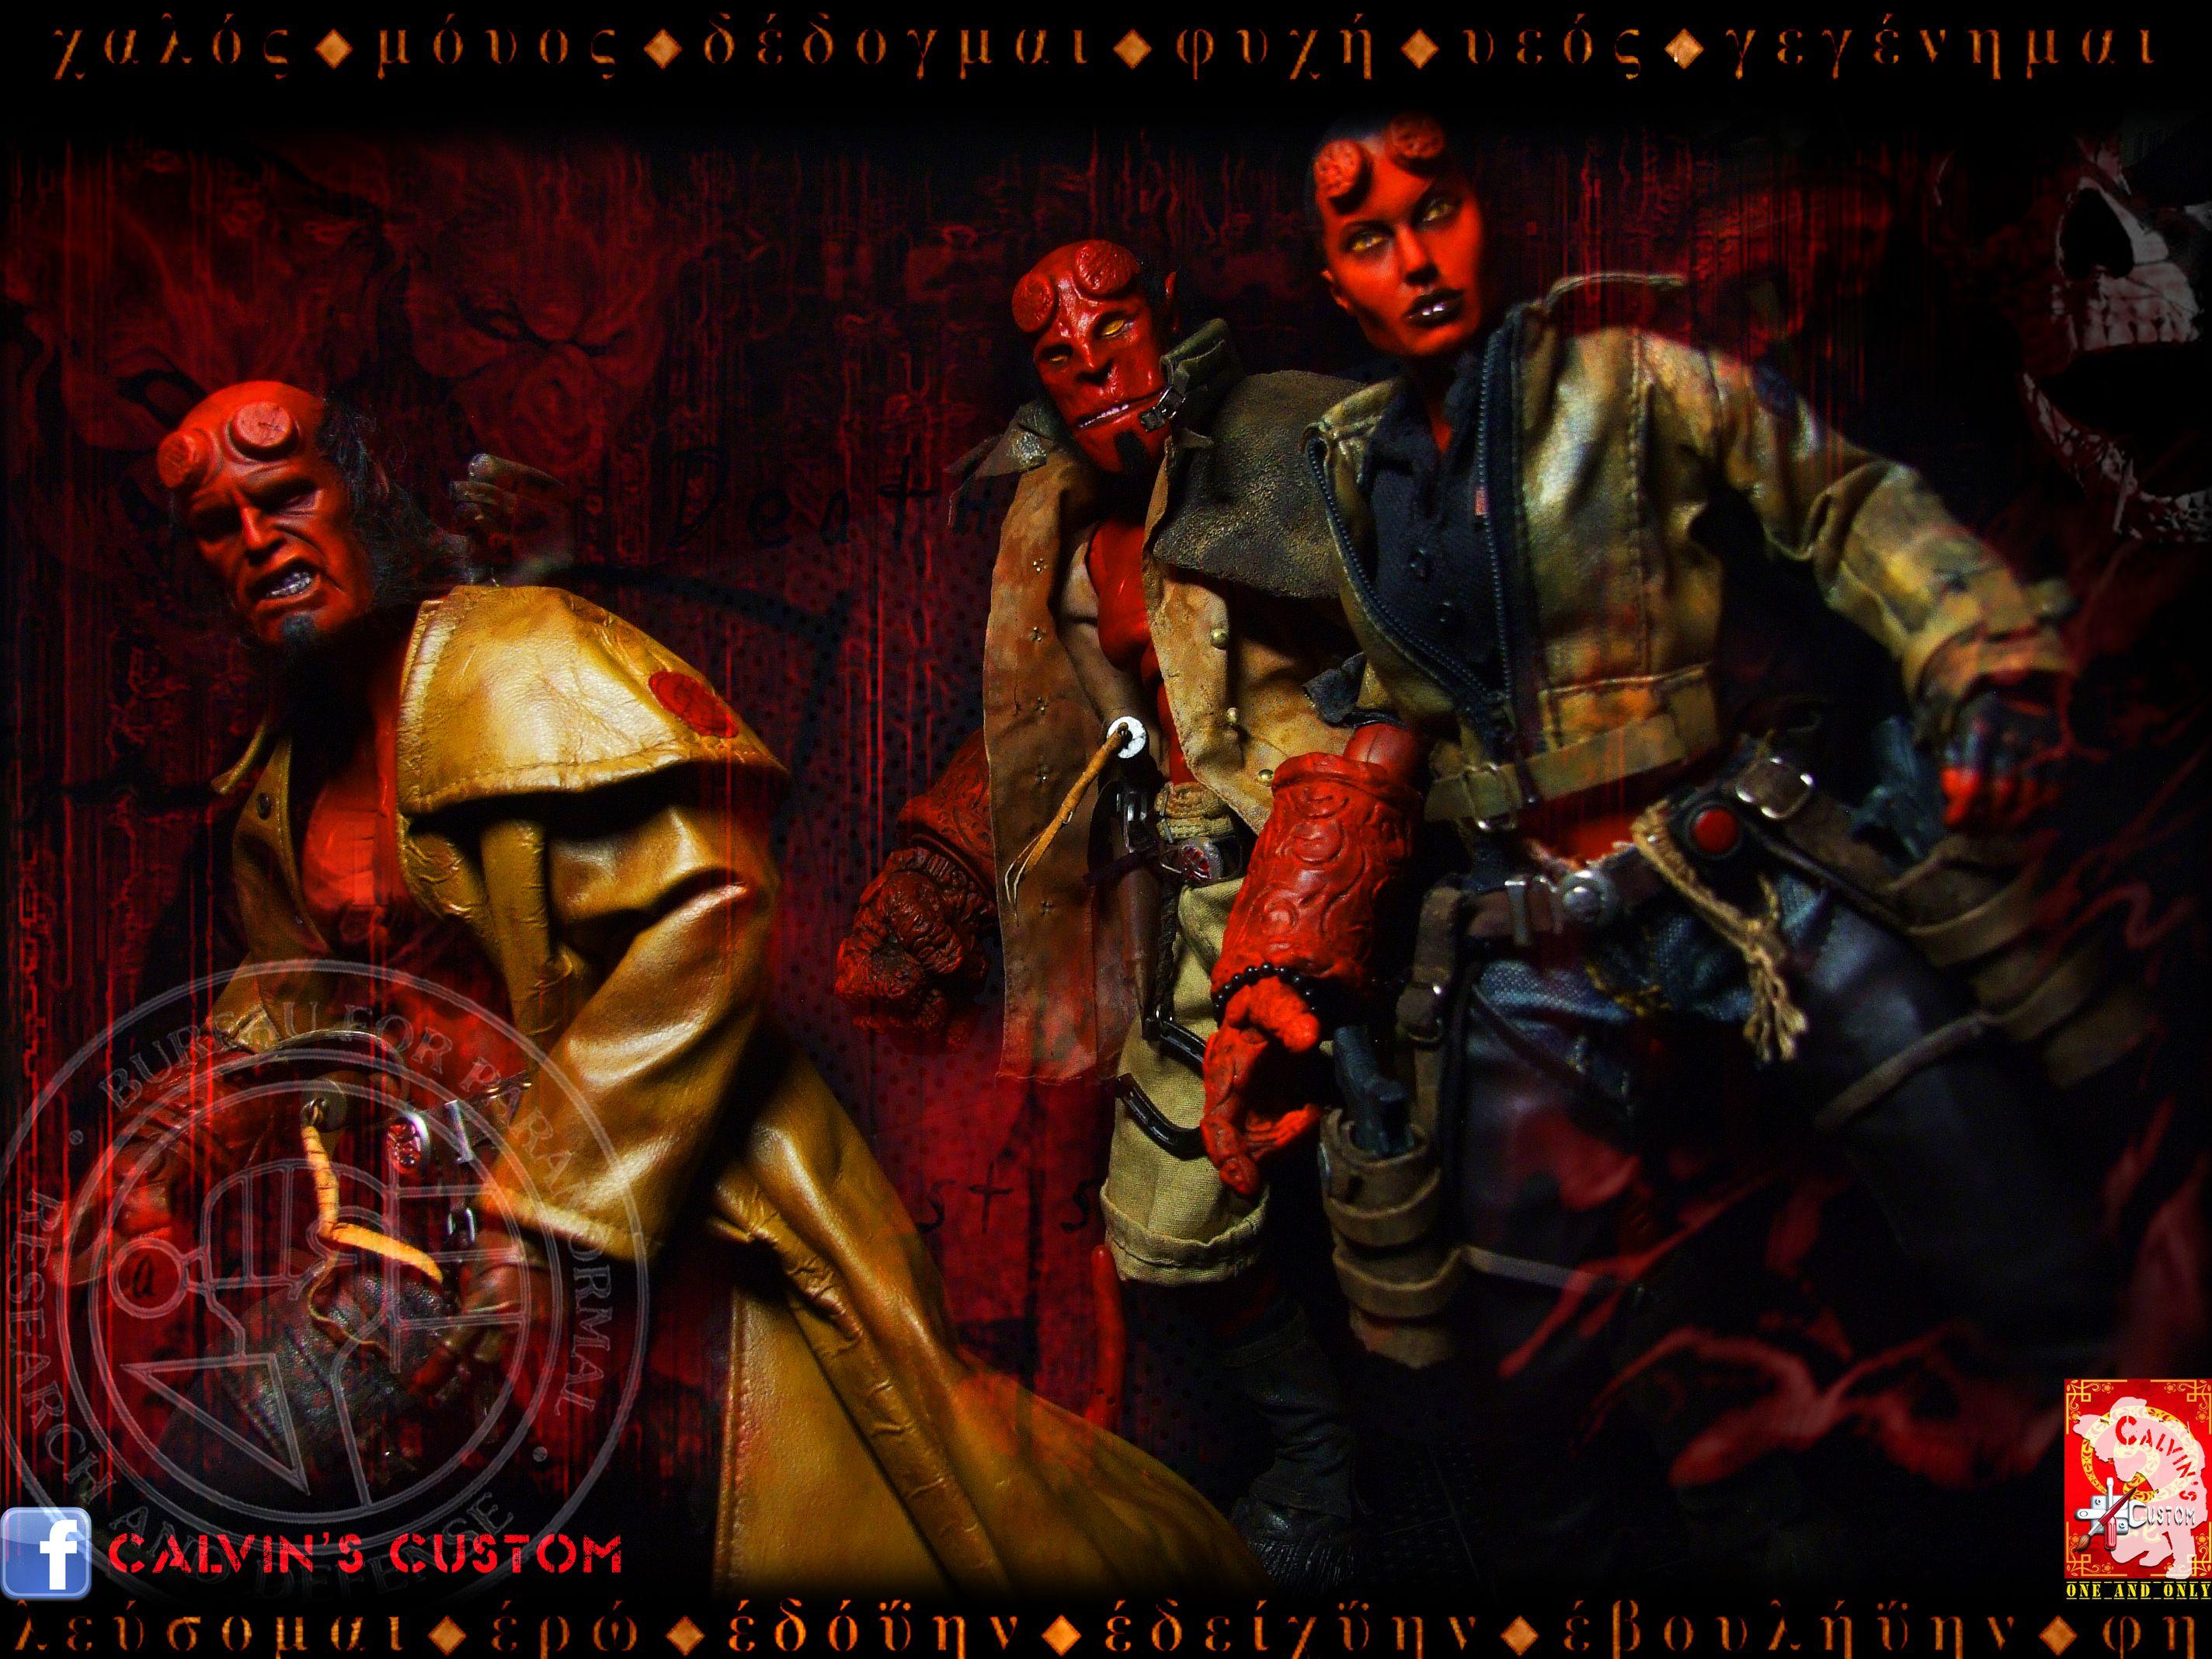 Hellboy 2 The golden Army wallpaper and image download wallpaper